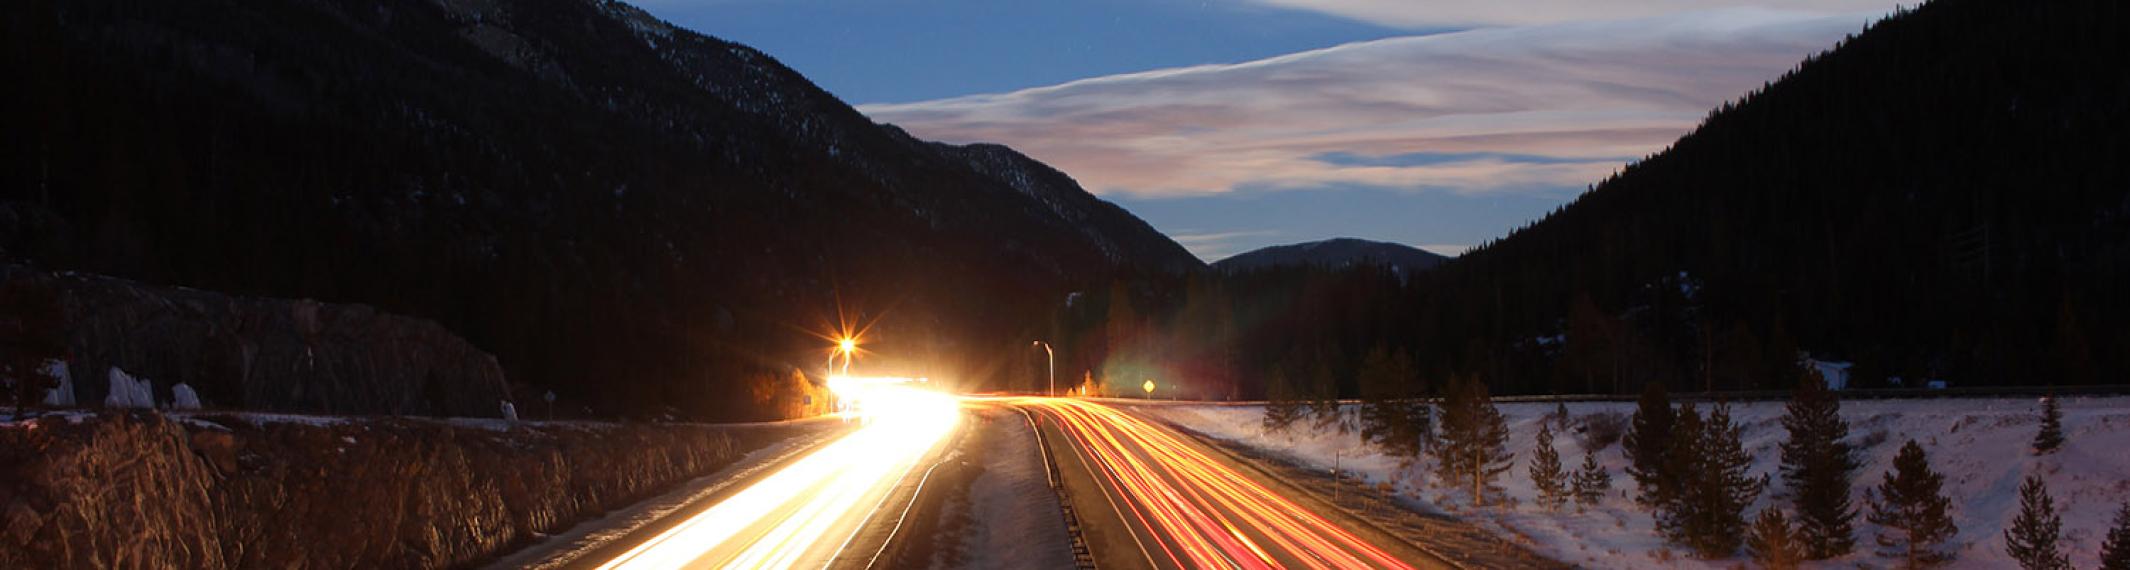 Two lanes of a highway in the mountains at sunset with blurred headlights and taillights